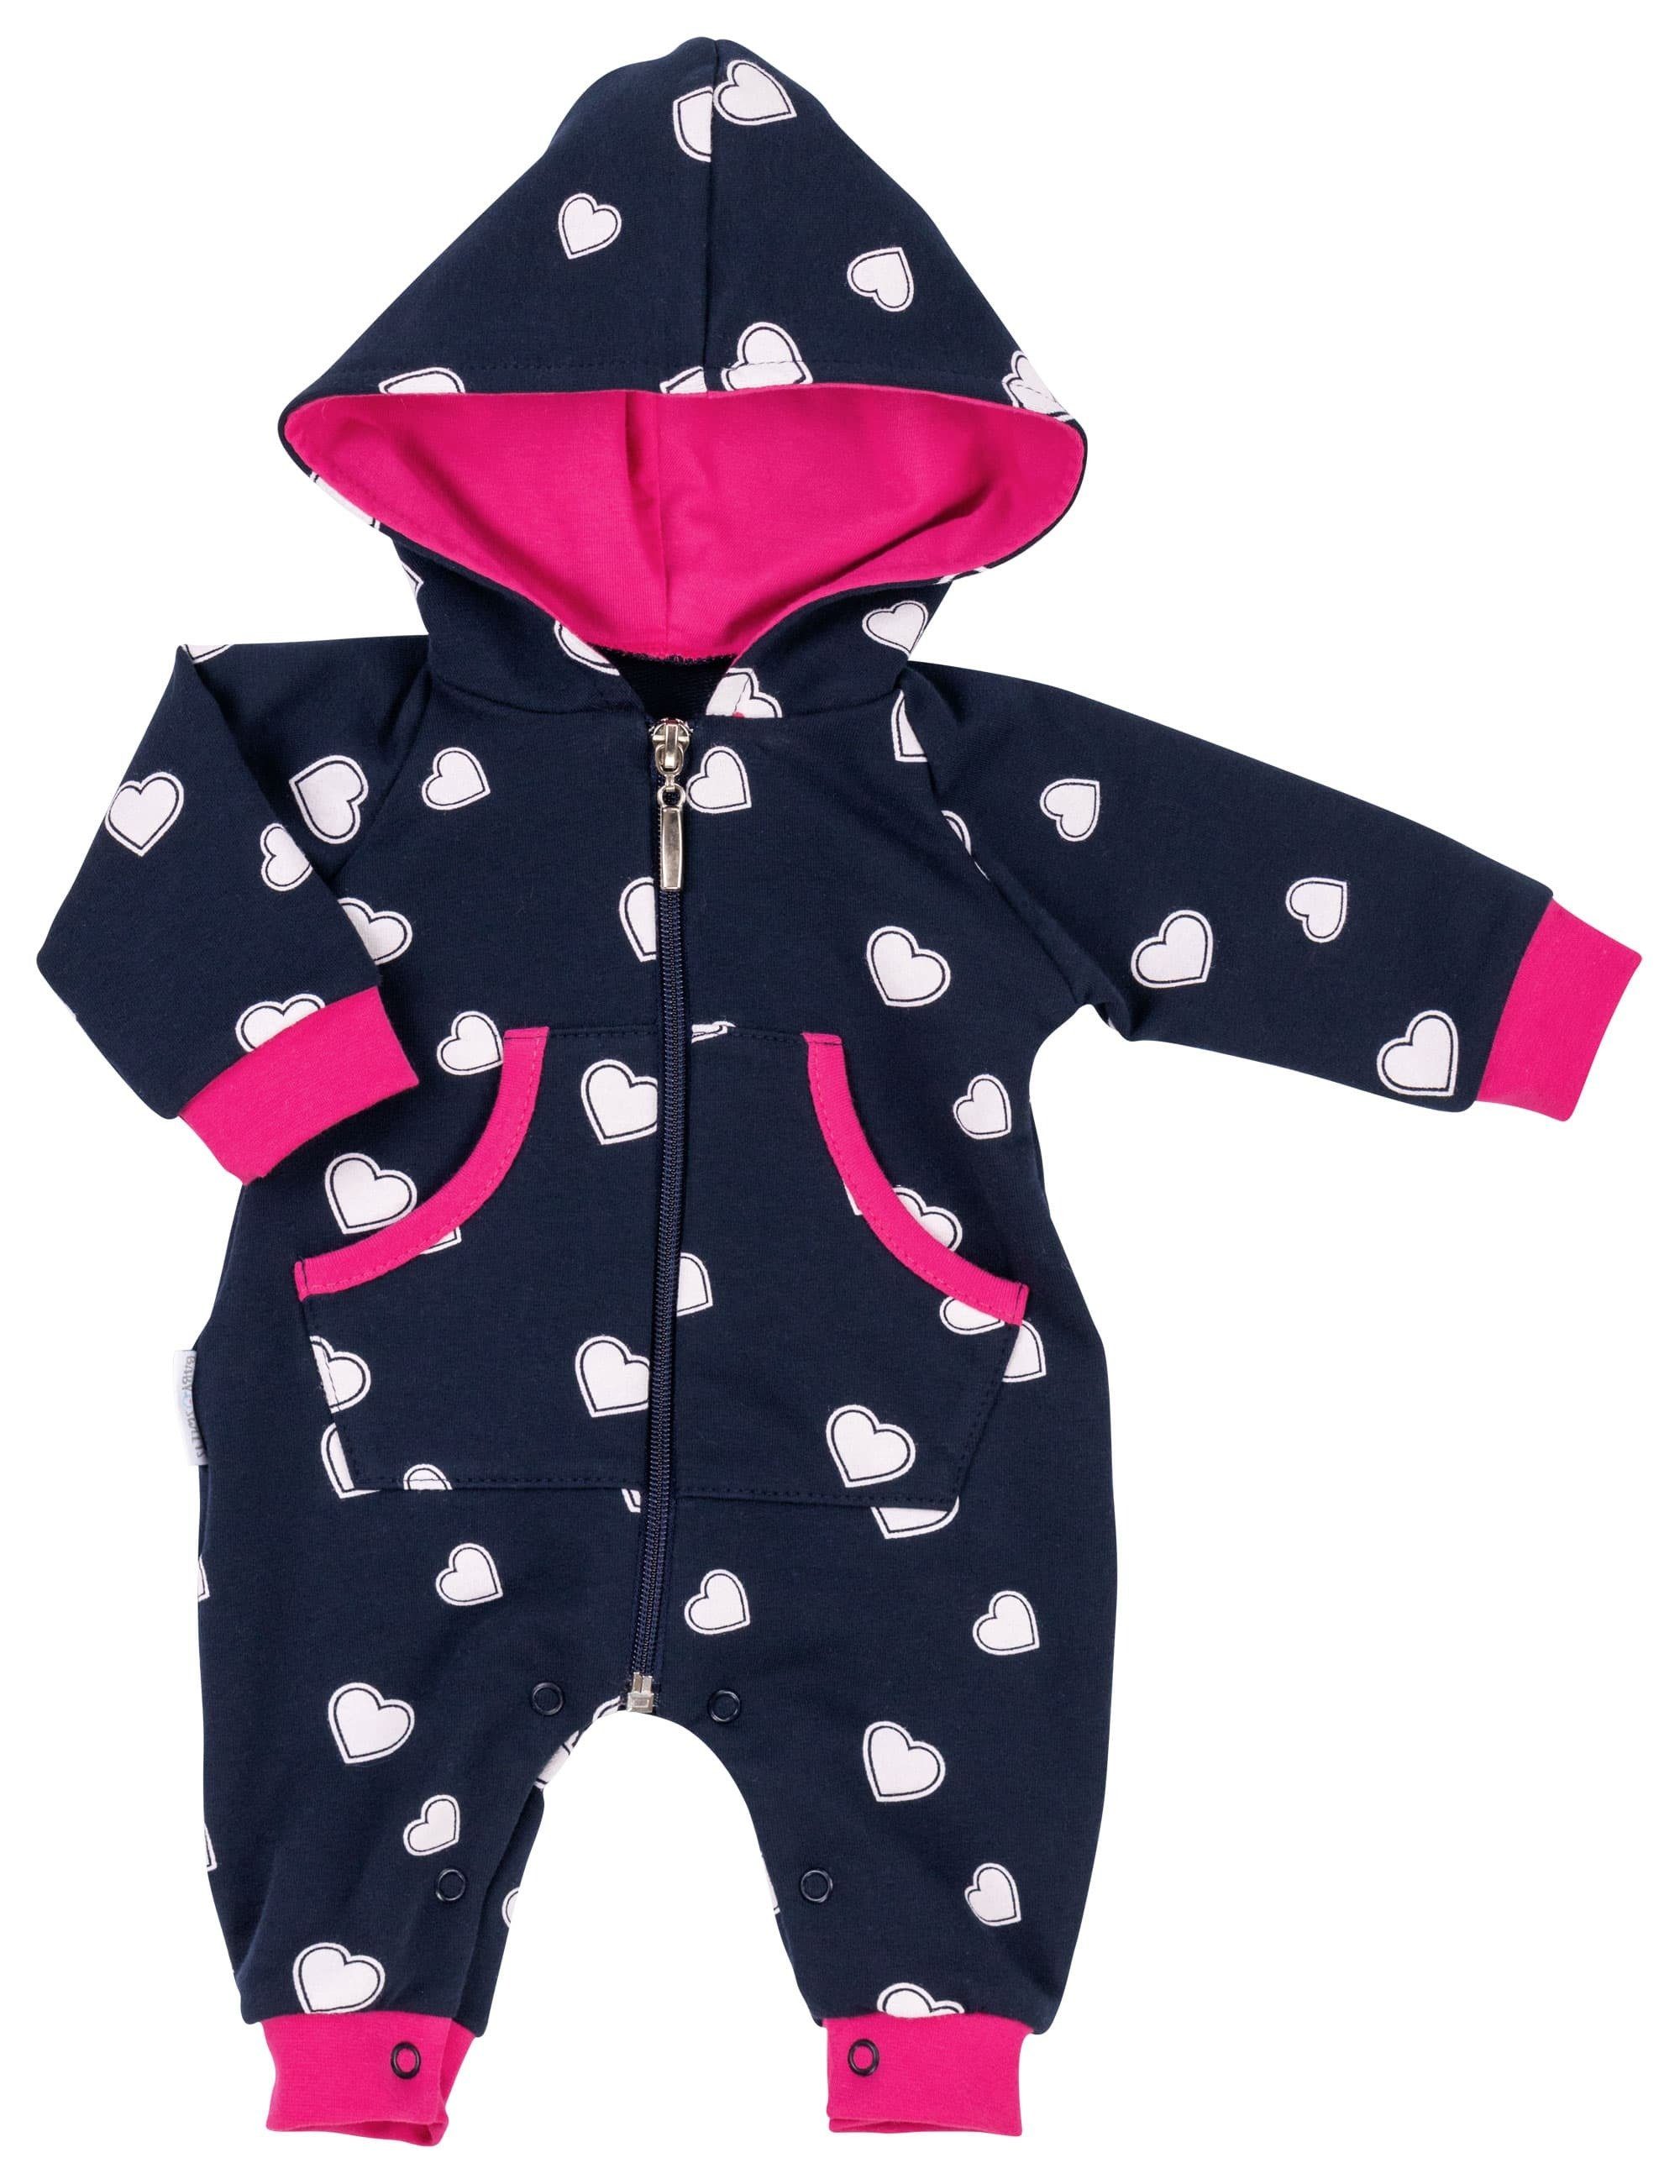 Strampler, Sweets pink dunkelblau Overall Overall Baby (1-tlg) Herz